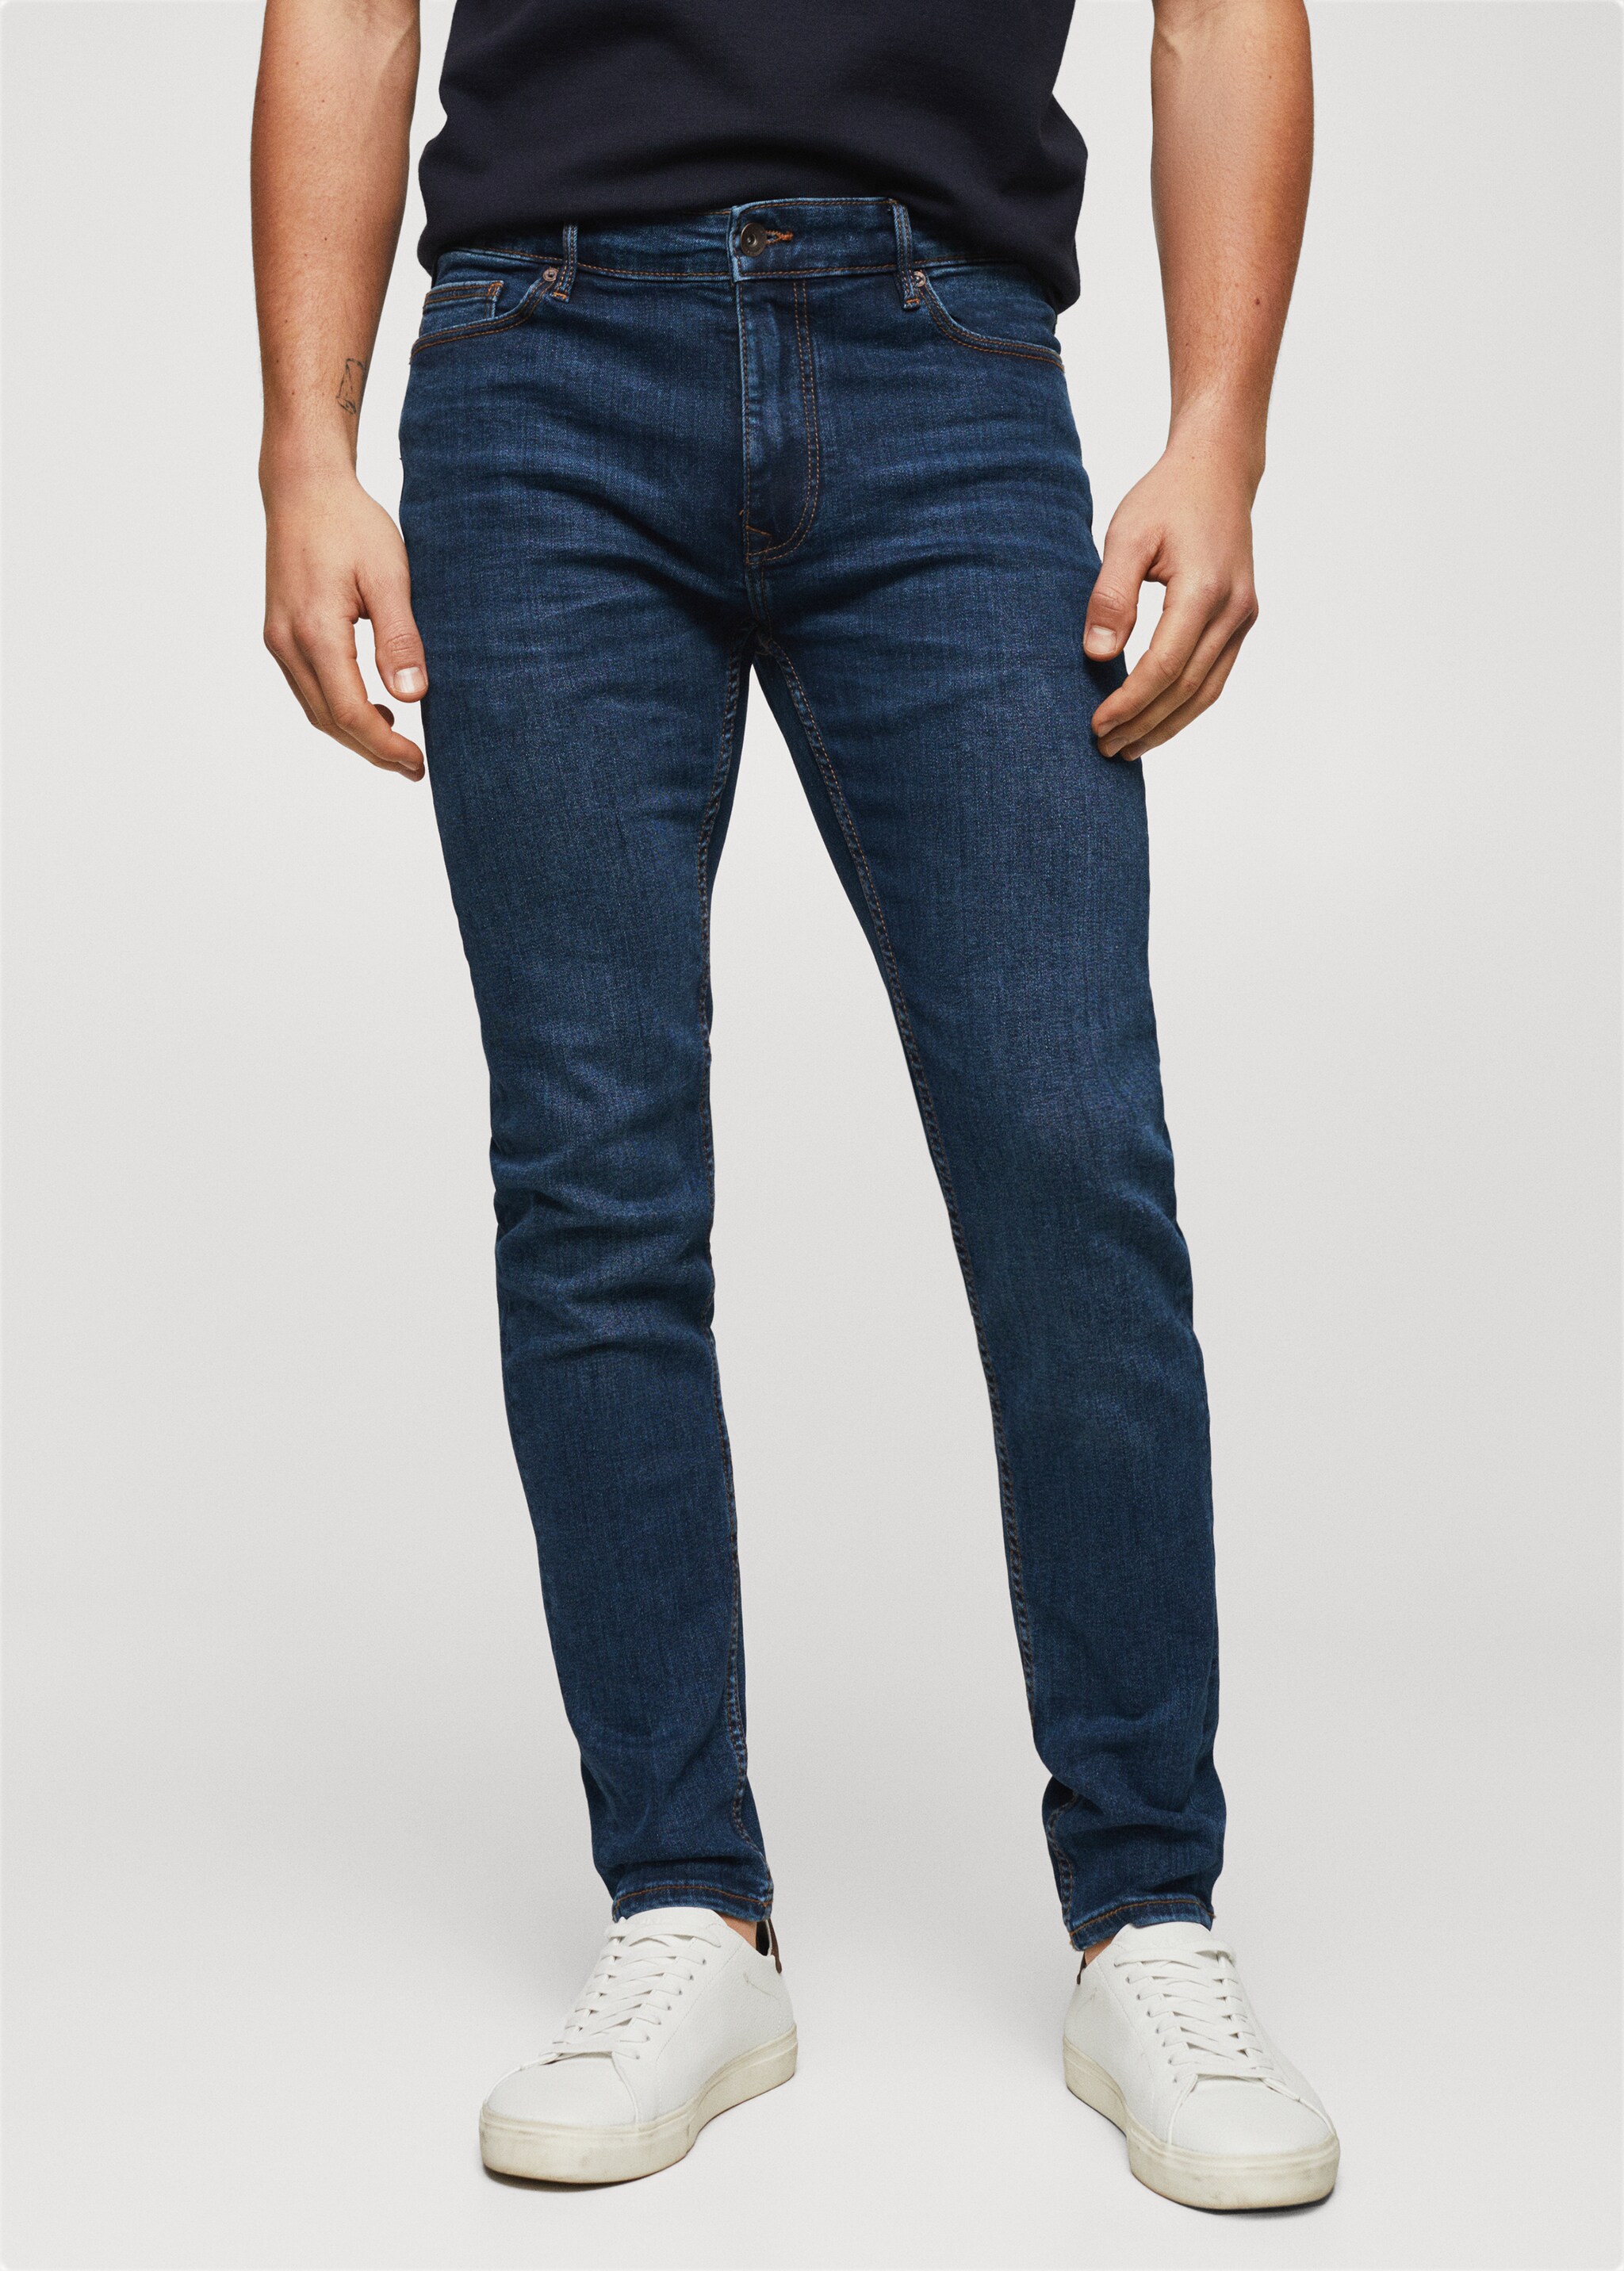 Jeans Jude skinny fit - Plano medio